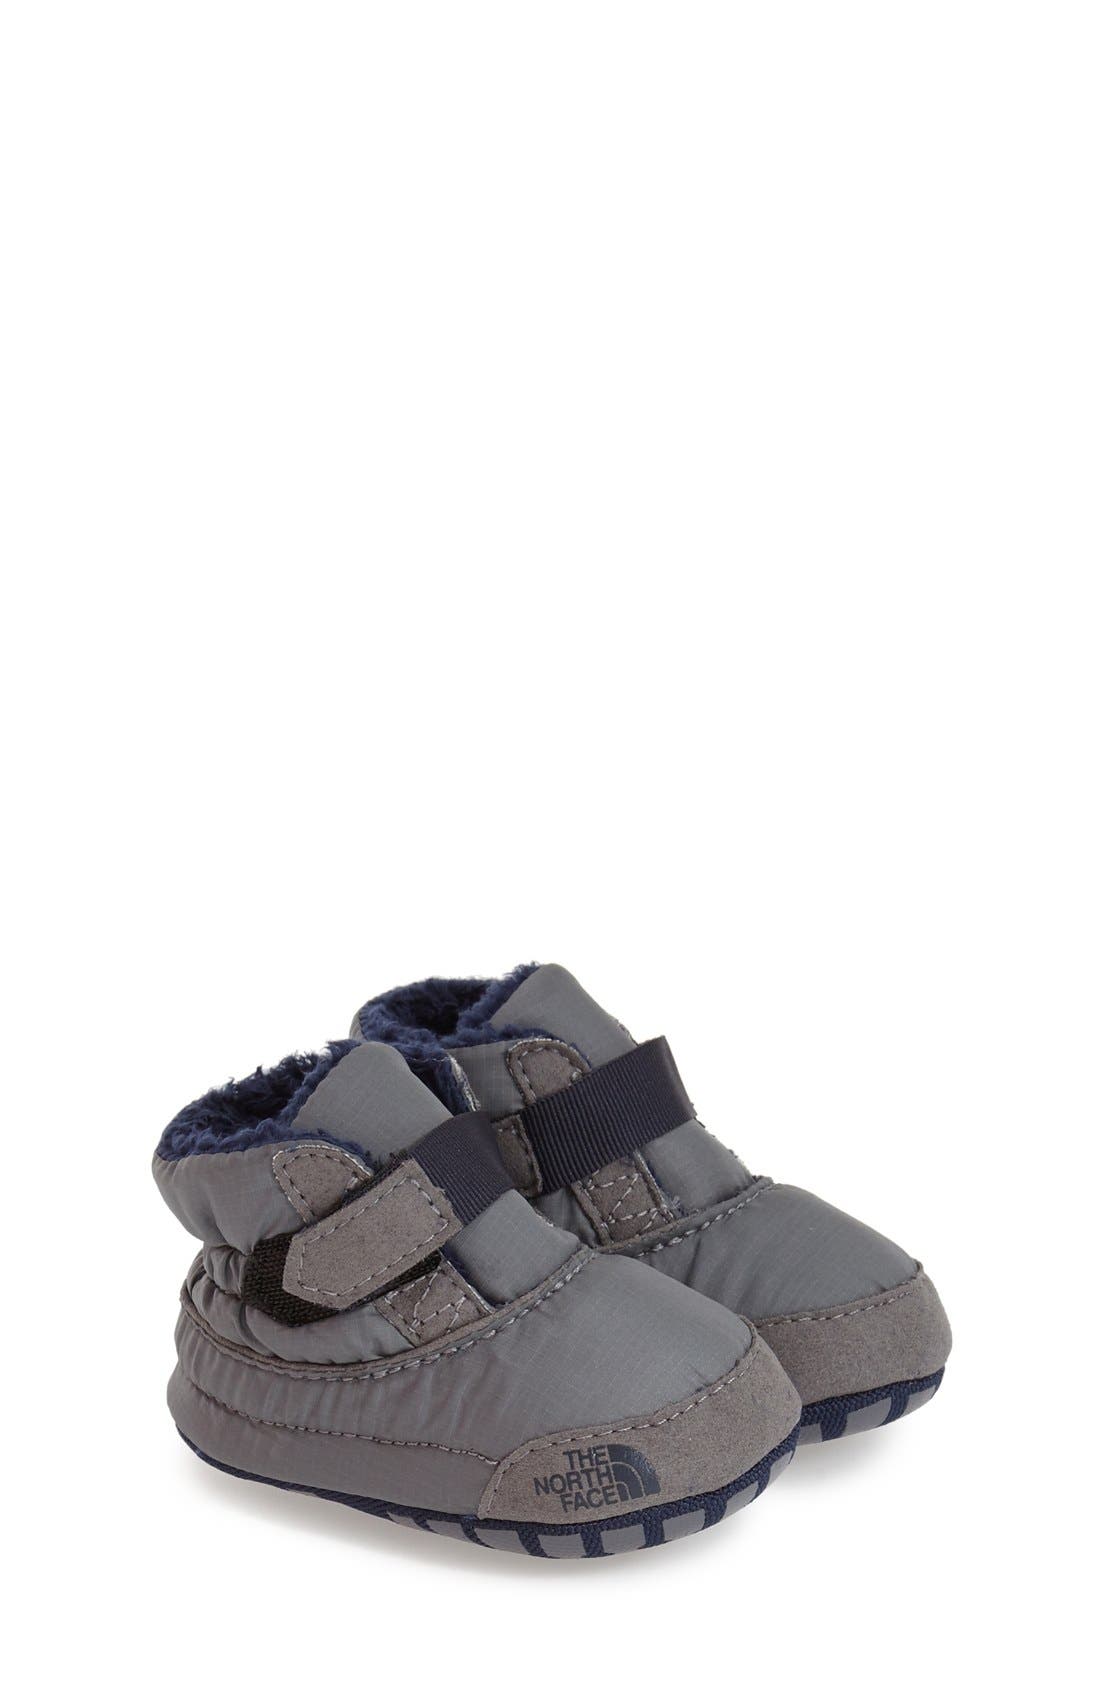 north face asher bootie